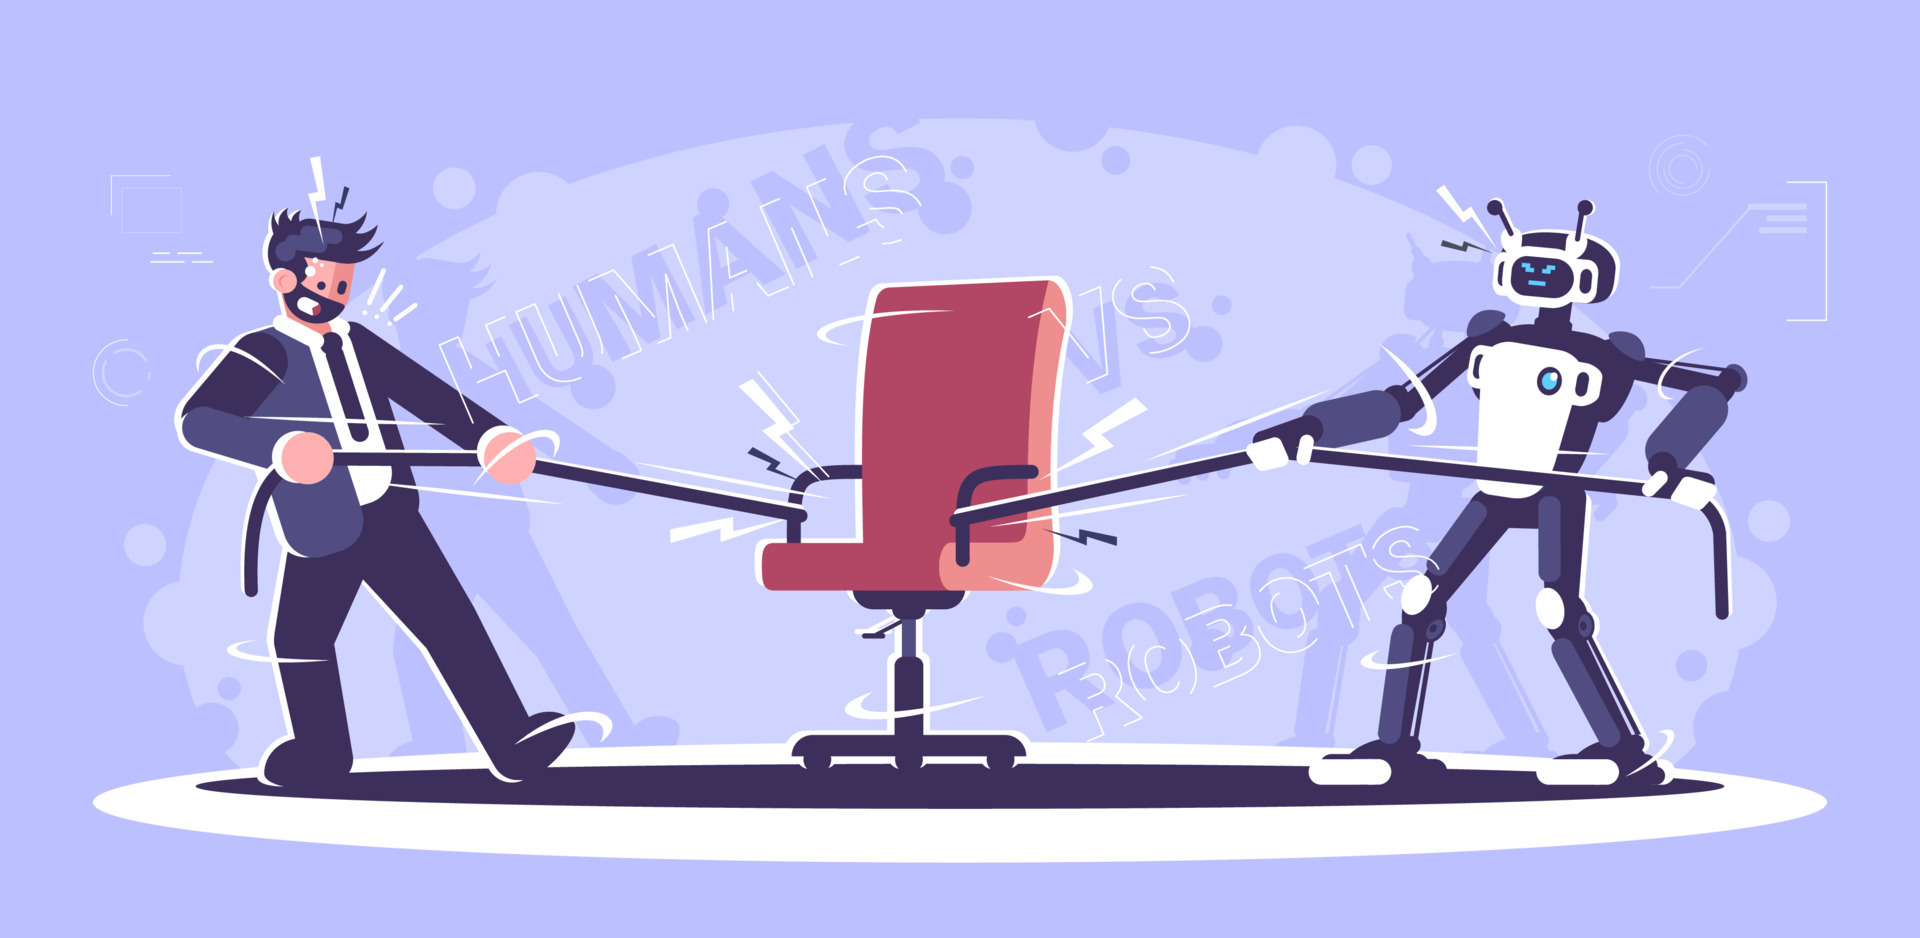 Human vs workers flat vector illustration. Humanoid and manager pulling with office chair. Cyborg and human fighting for open vacancy, vacant position. Robotics revolution 4665023 Art at Vecteezy